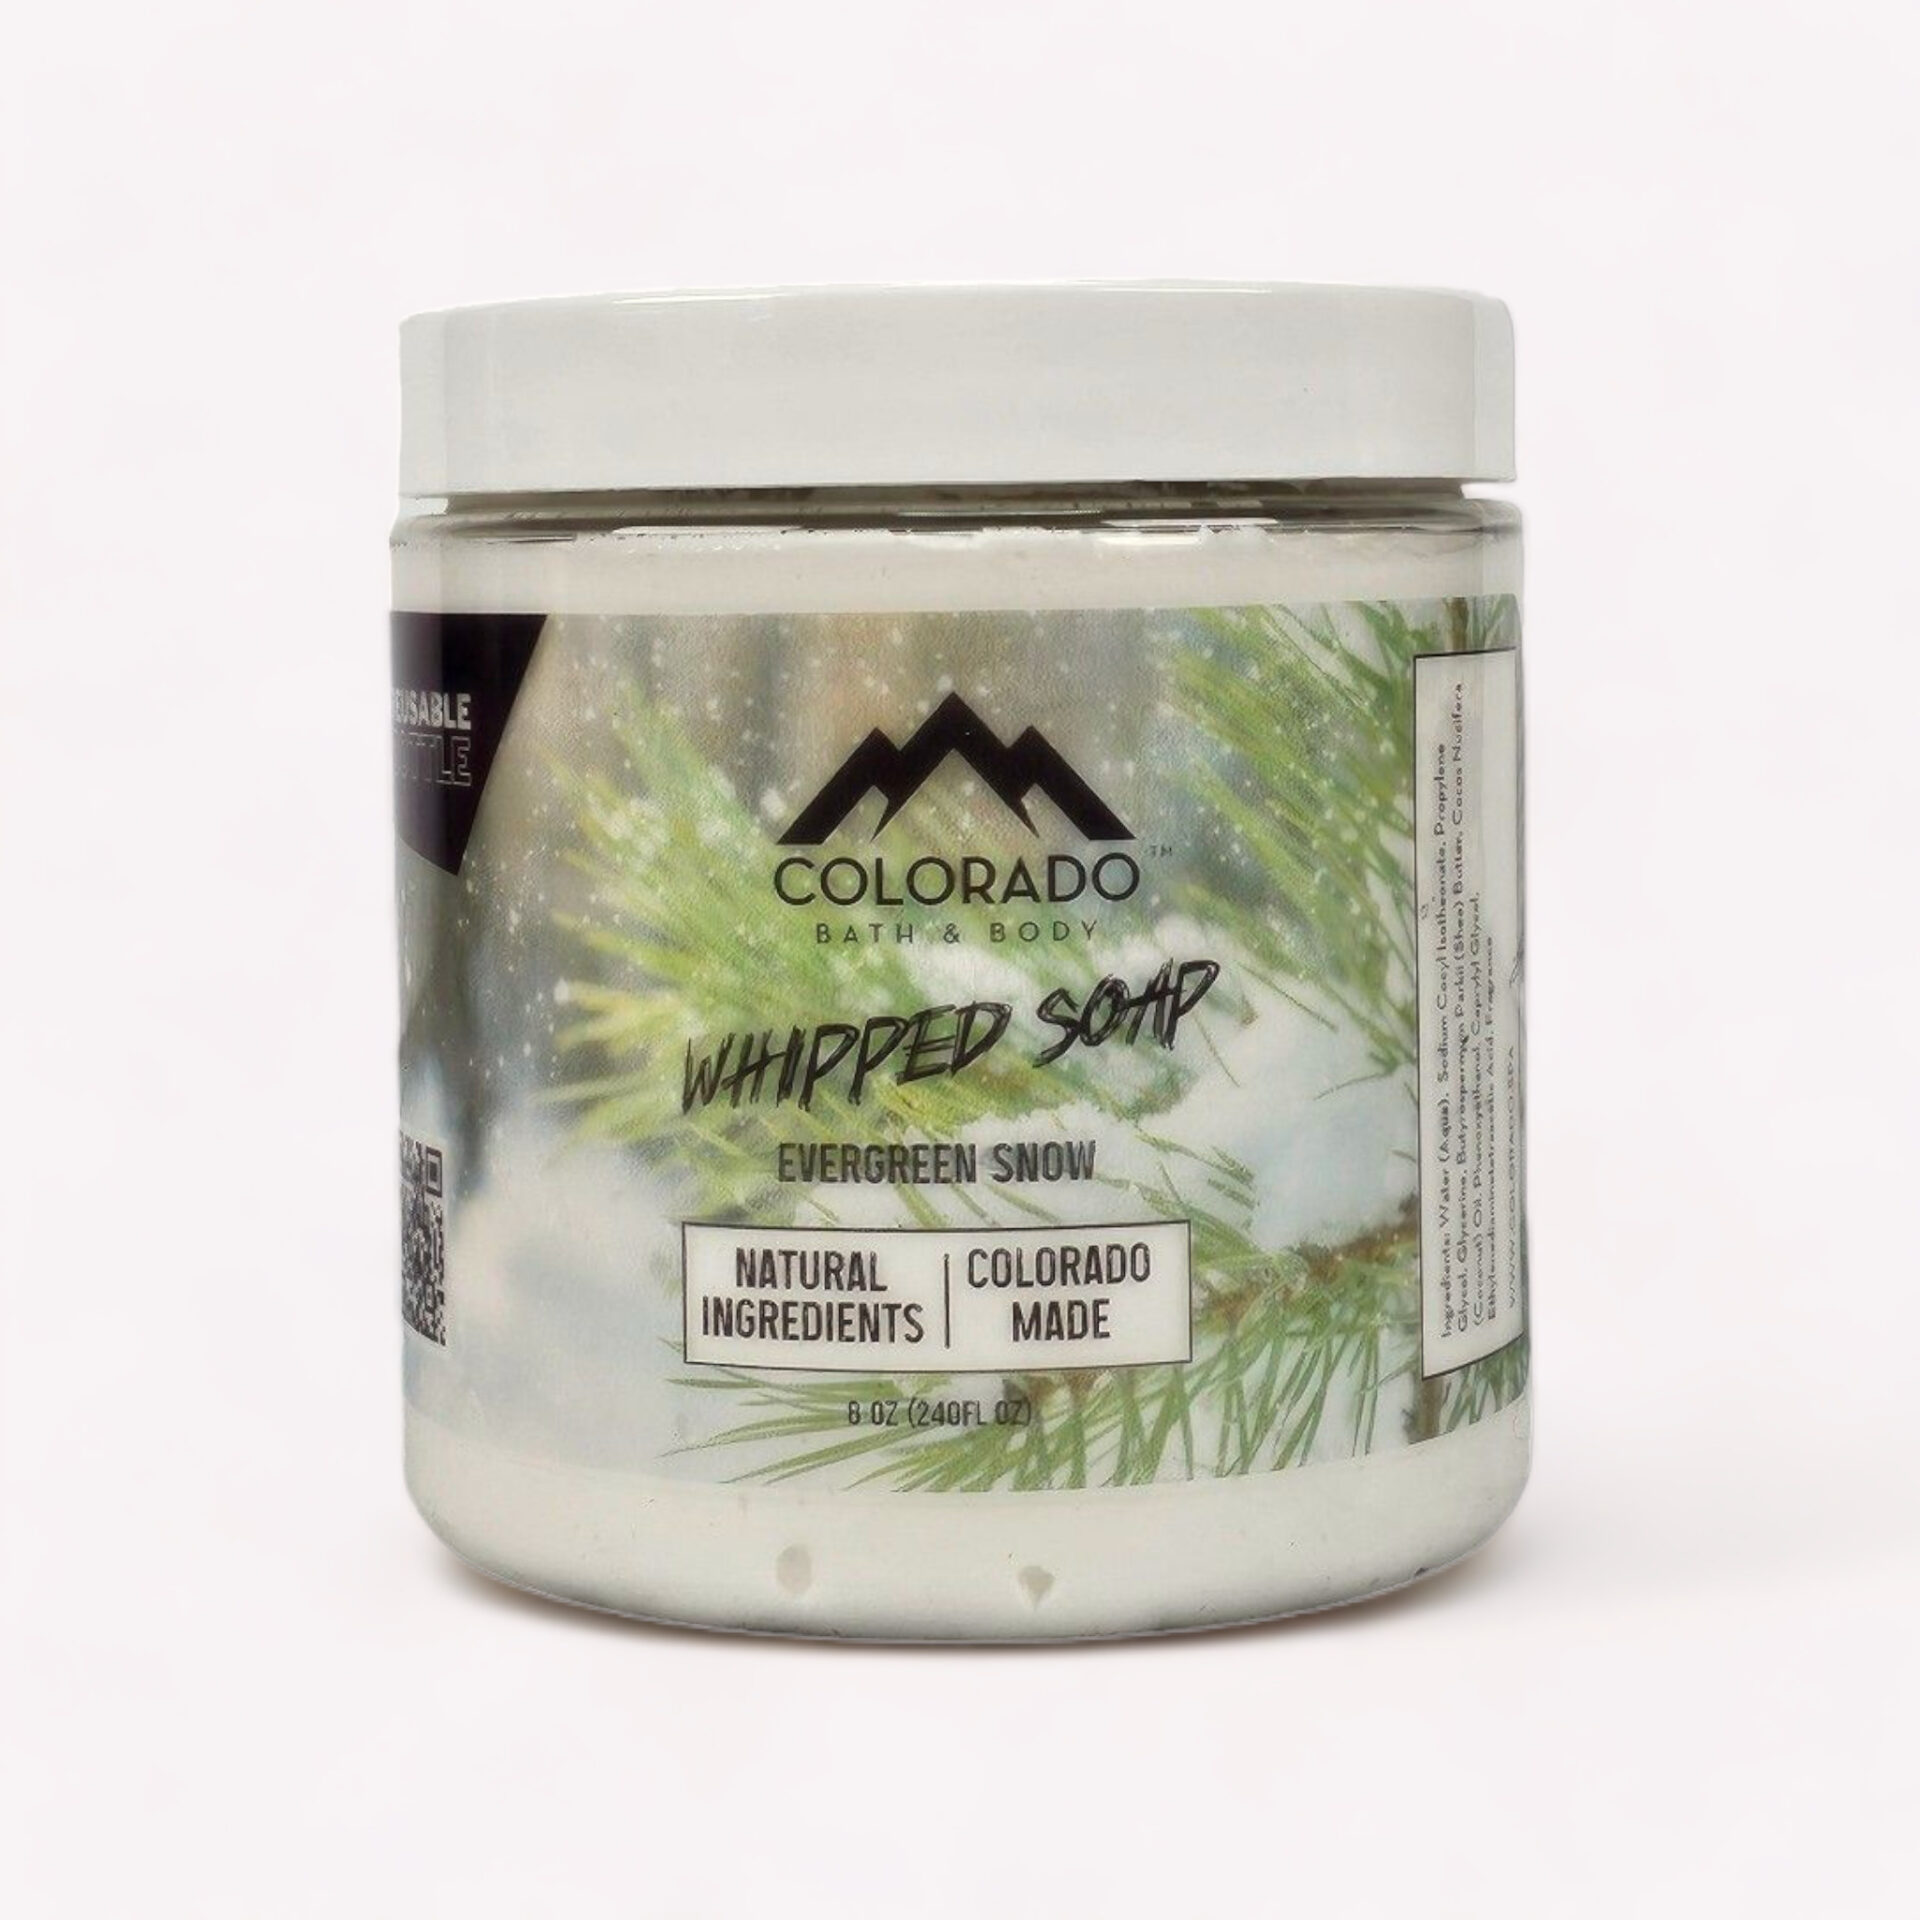 Evergreen Snow Limited Edition Whipped Soap